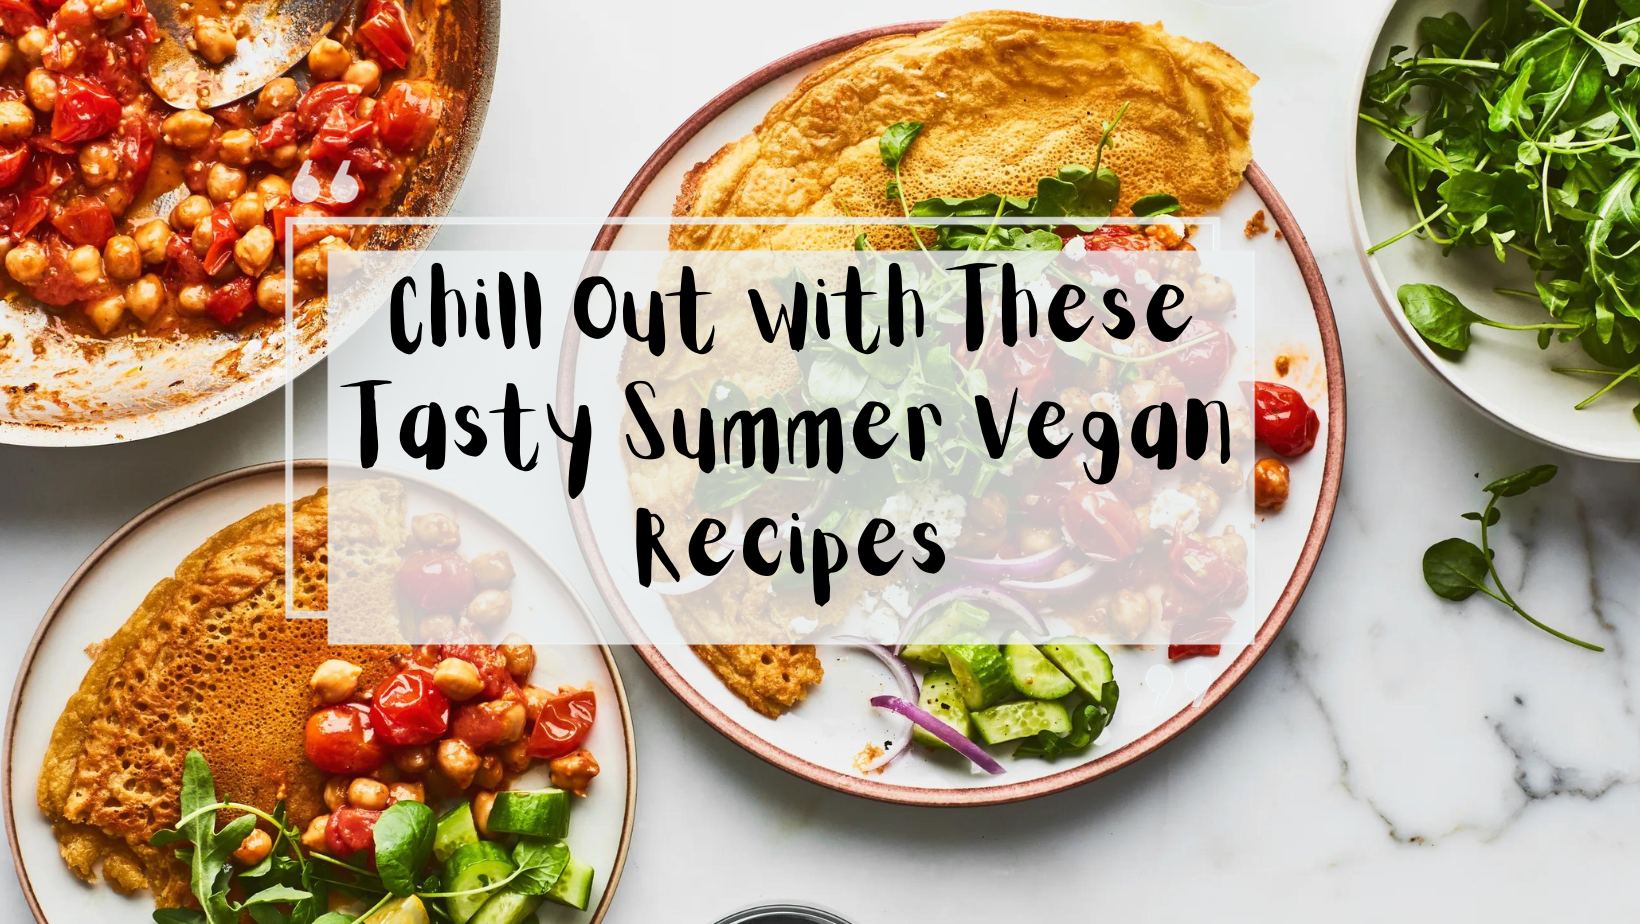 Chill Out with These Tasty Summer Vegan Recipes